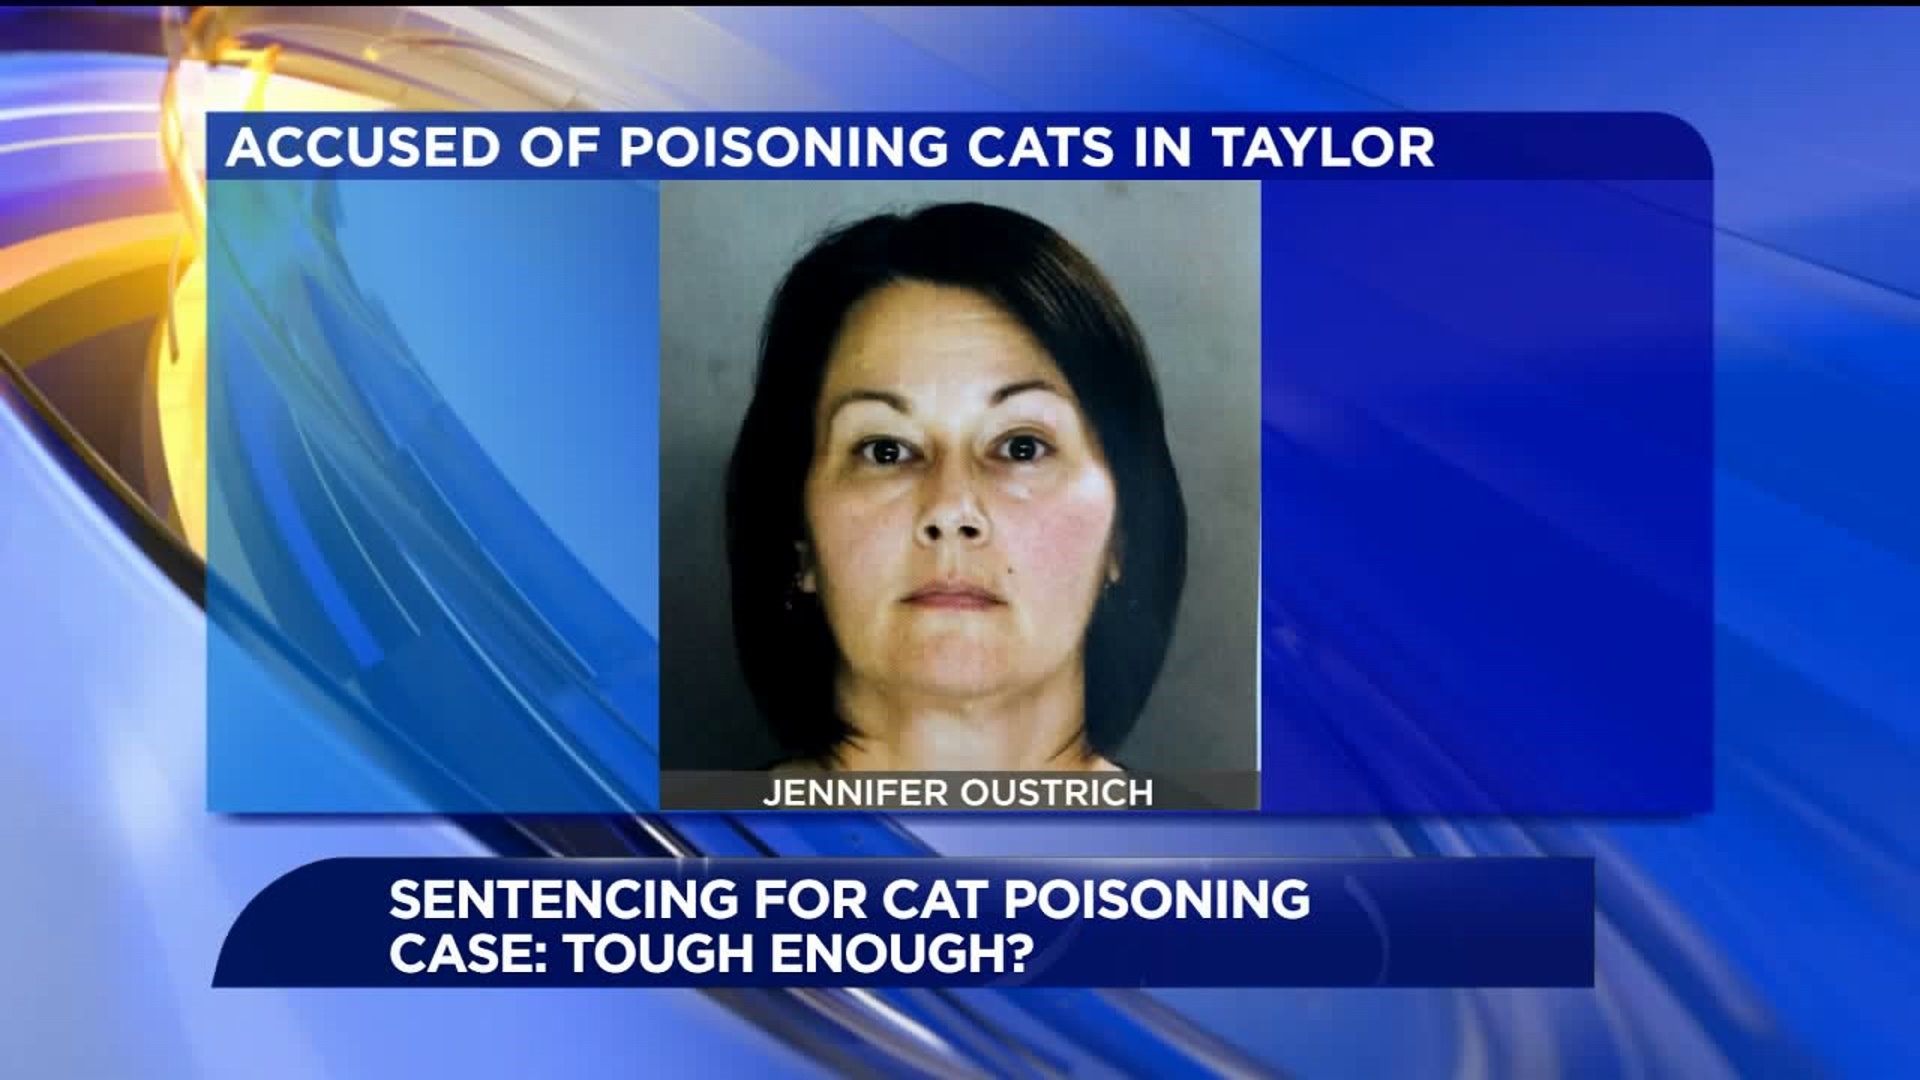 Animal Advocates Concerned Over Sentence in Taylor Cat Case